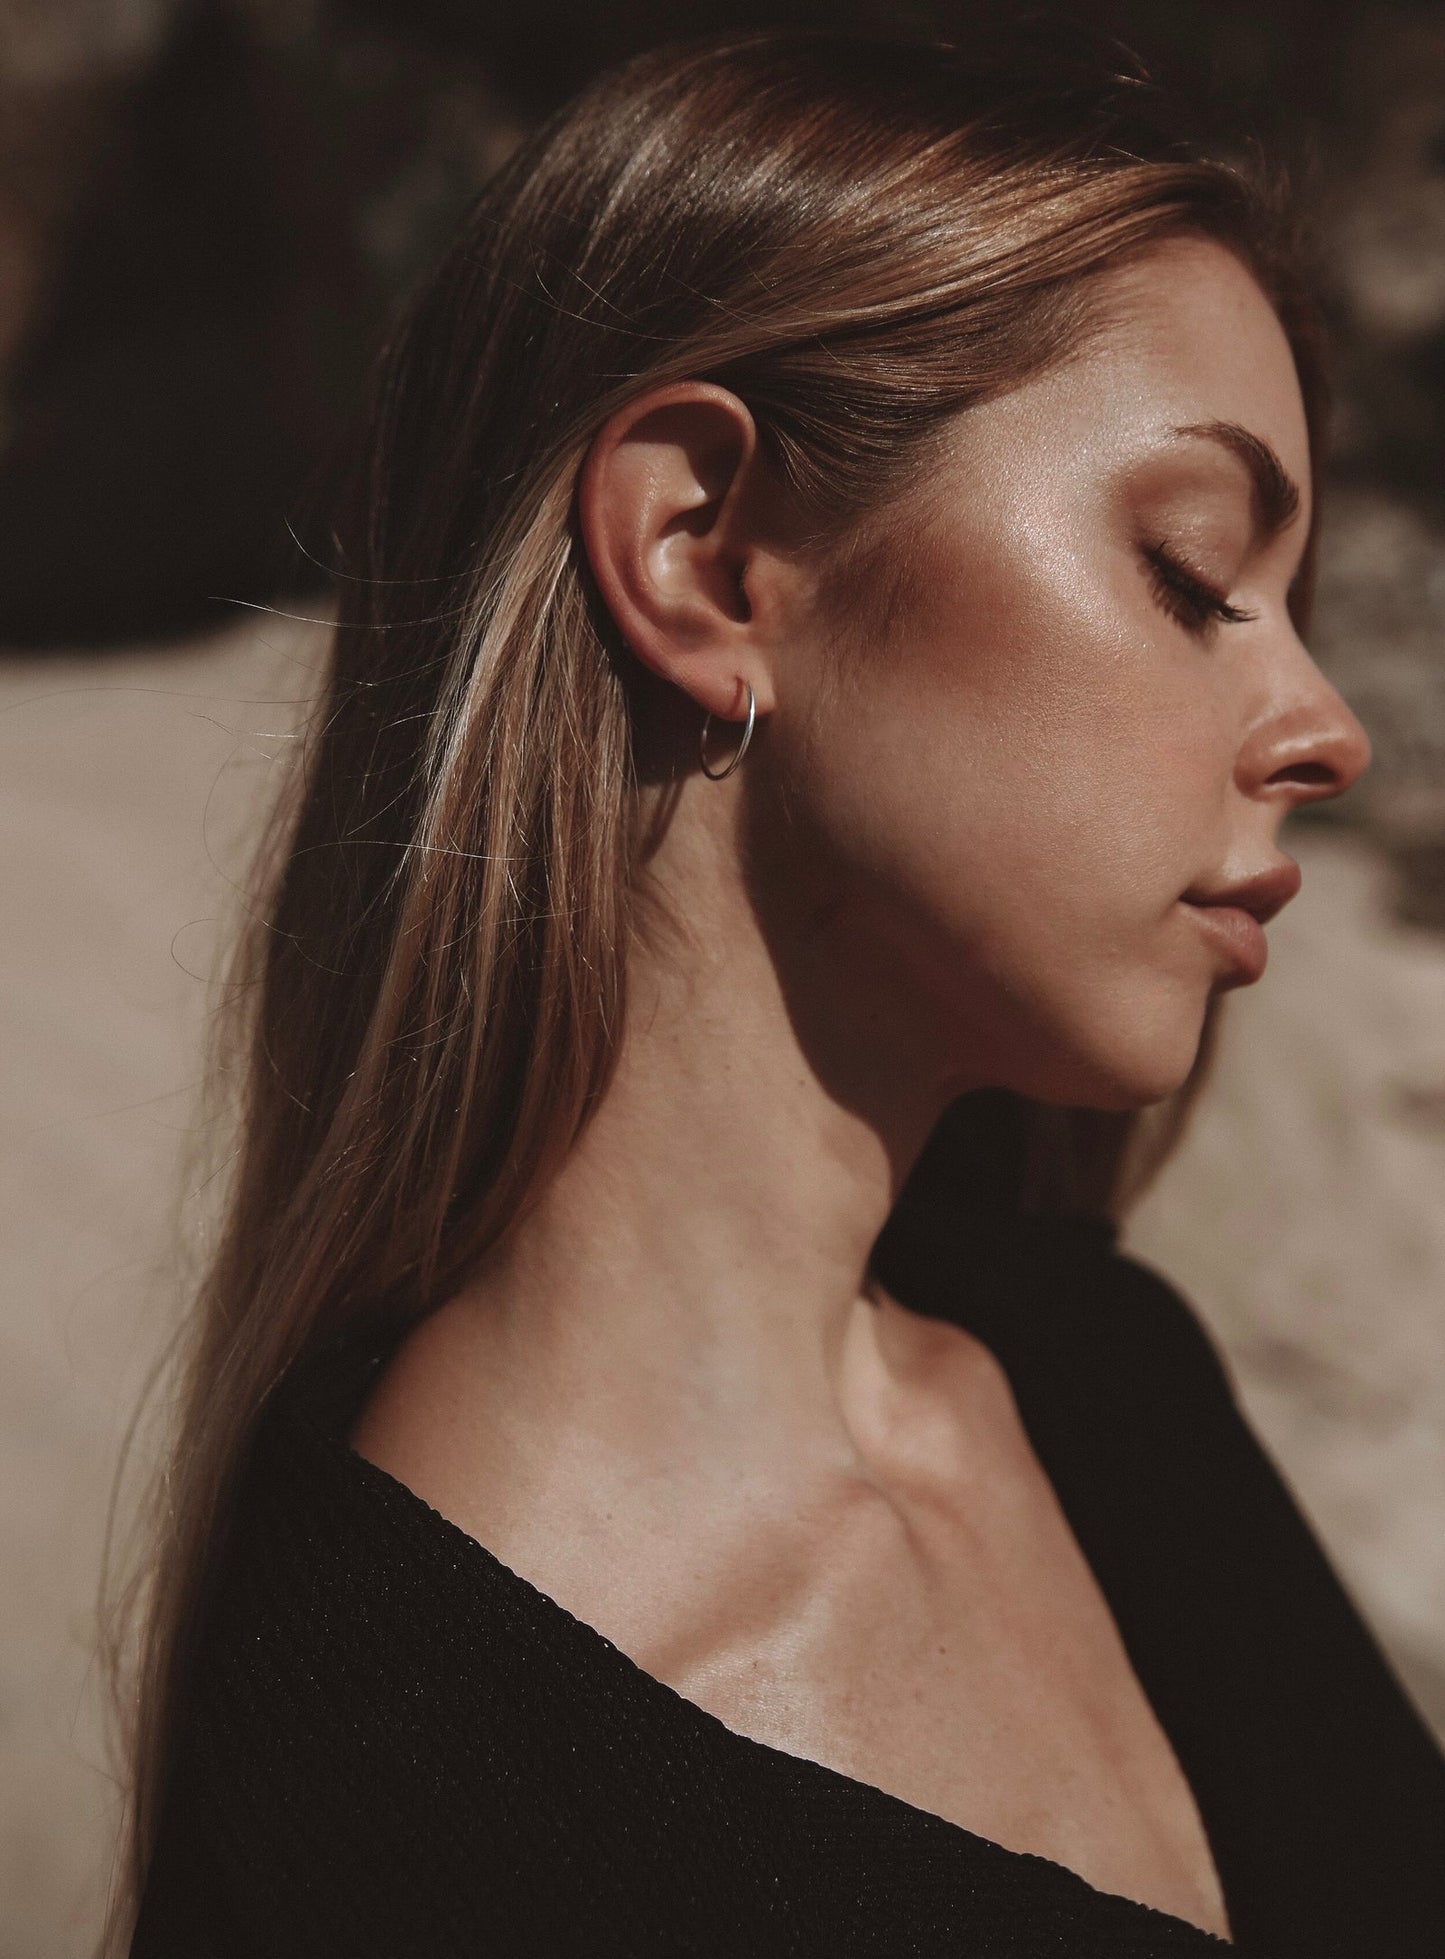 Simple seamless light weight hollow hoop earrings for any day and everywhere. Every jewelry collection needs its foundational basics and a simple hoop is a timeless classic you’ll keep on rotation, perfect for any occasion. Handmade in the Santa Cruz Mountains.